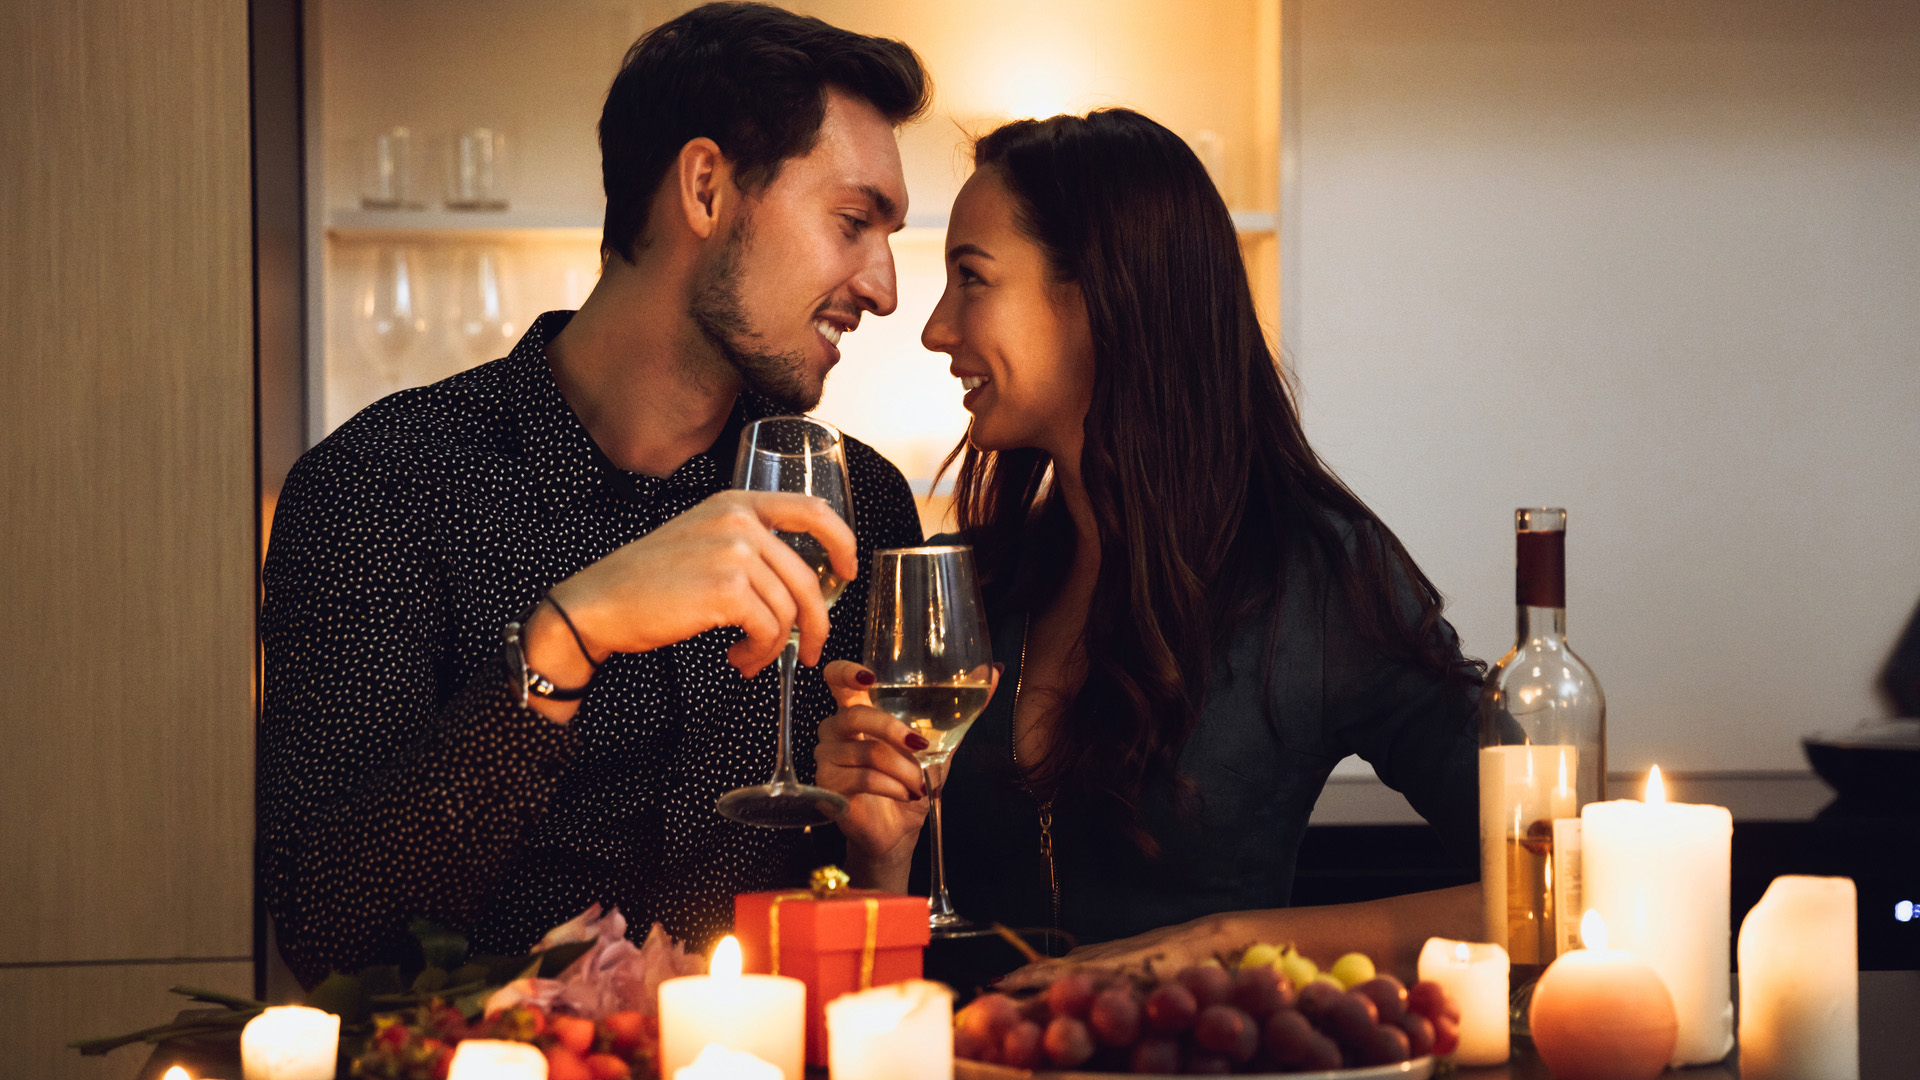 Brunette man and woman sitting close to each other while holding wine glasses and looking into each others' eyes. Lit candles